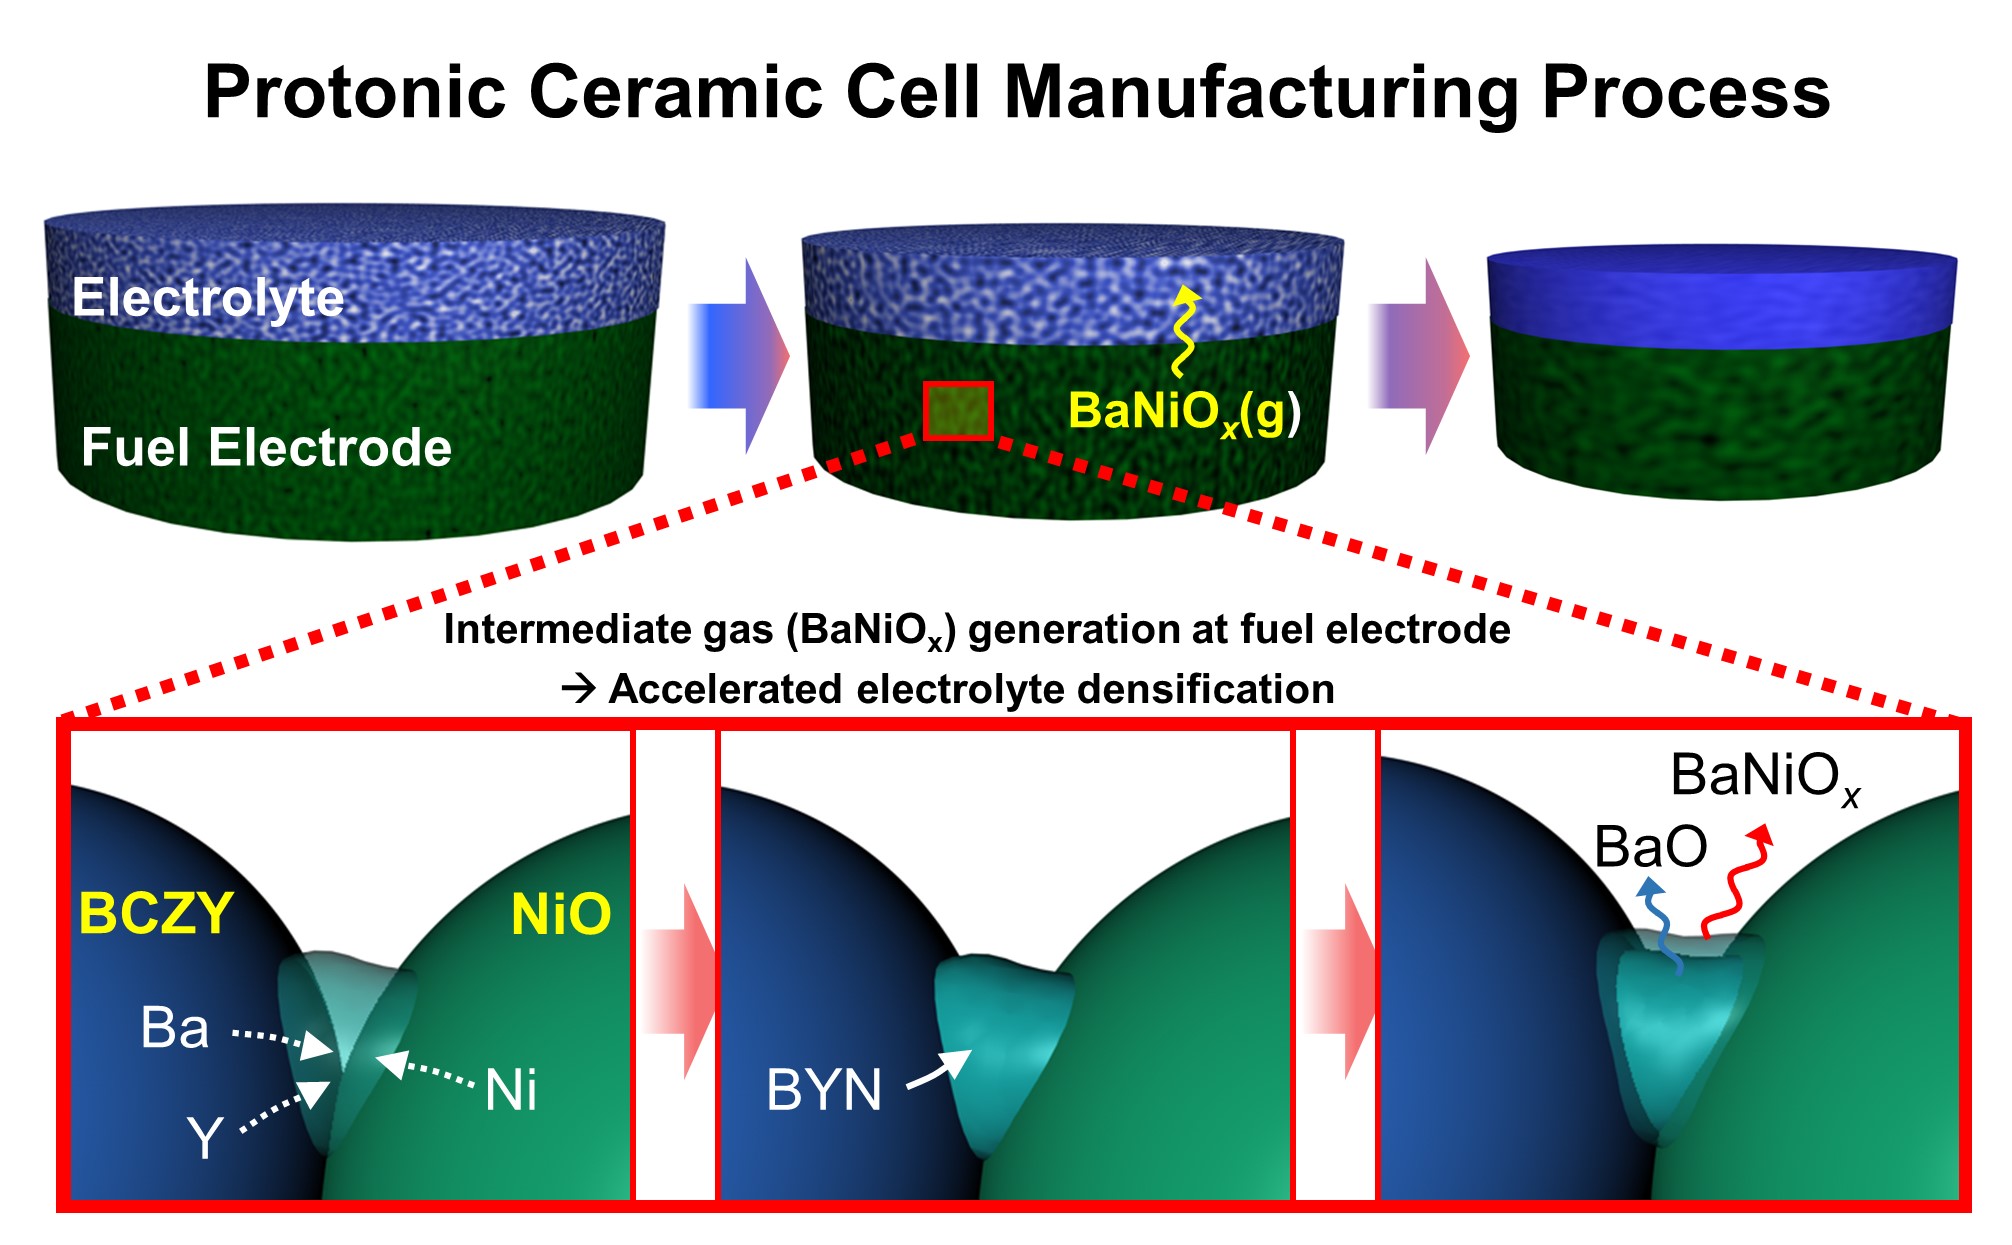 The principle of accelerating electrolyte densification in the proton ceramic cell manufacturing process